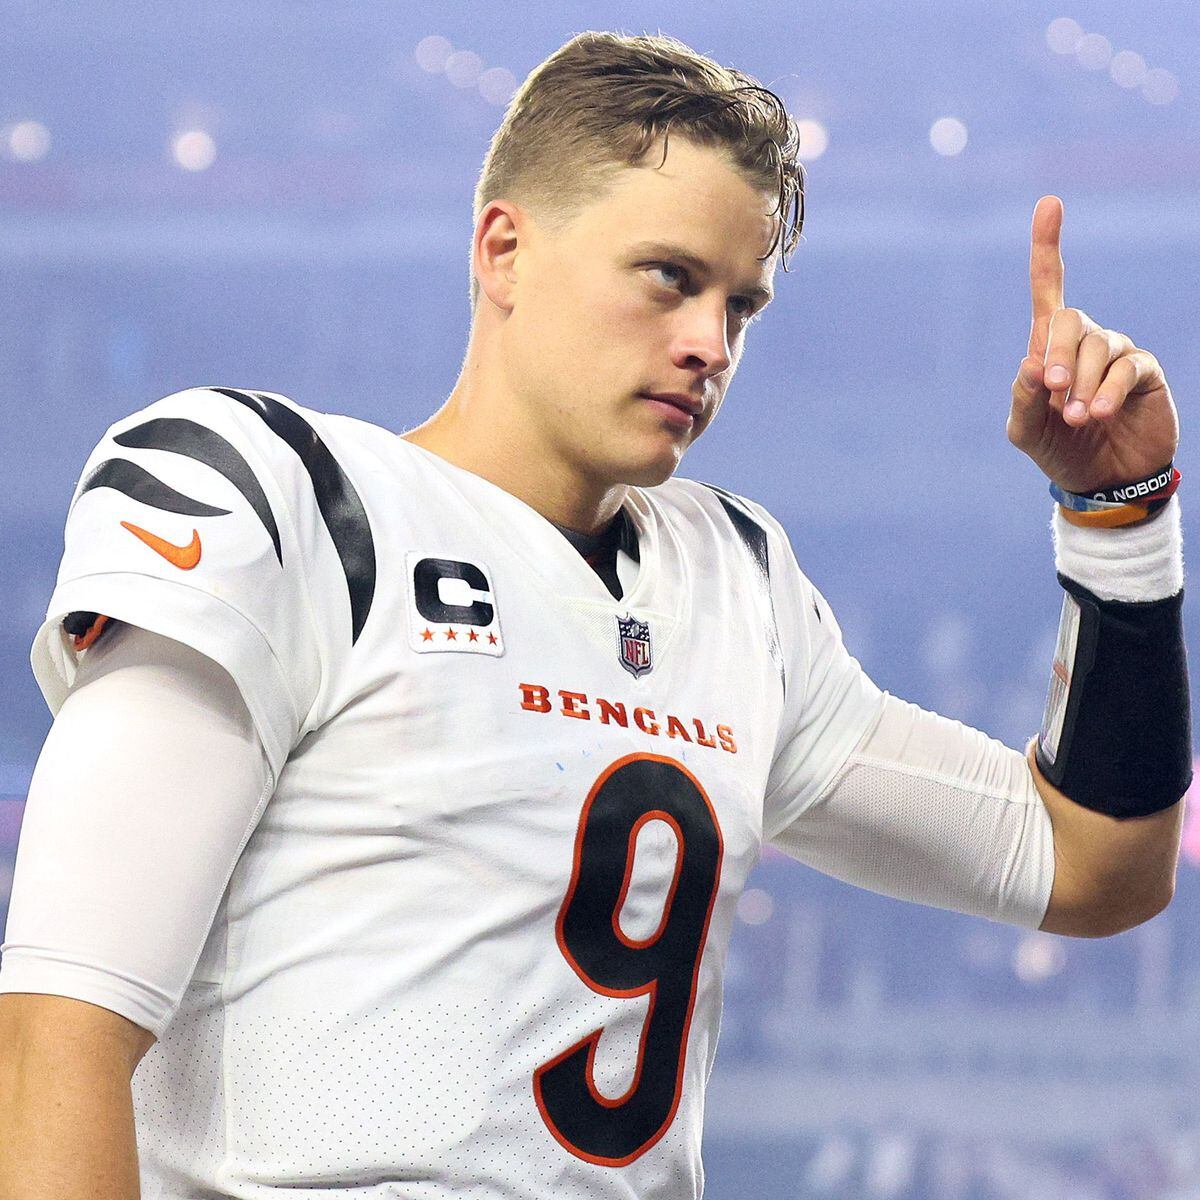 What did the Bengals' Joe Burrow say about his calf after Monday